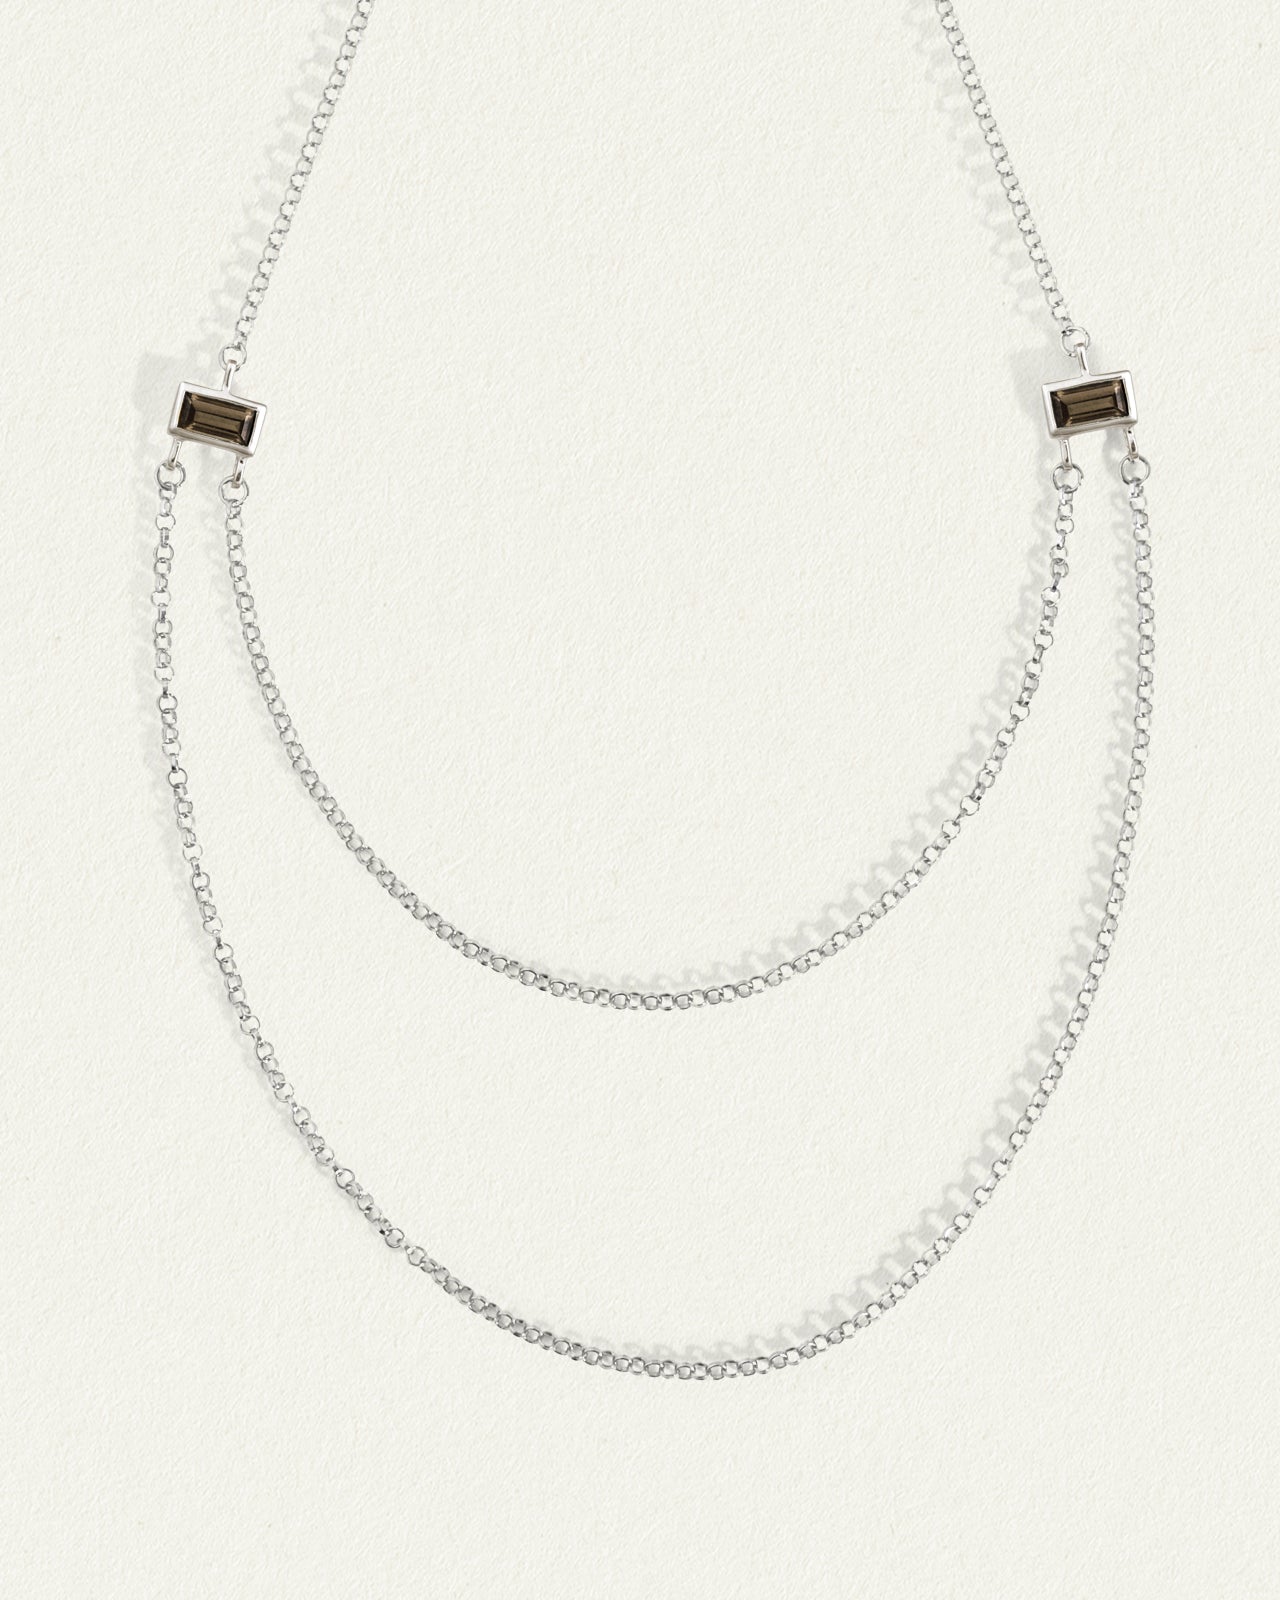 HERMES Necklace 'Chaine d'Ancre' in Sterling Silver 800 - VALOIS VINTAGE  PARIS